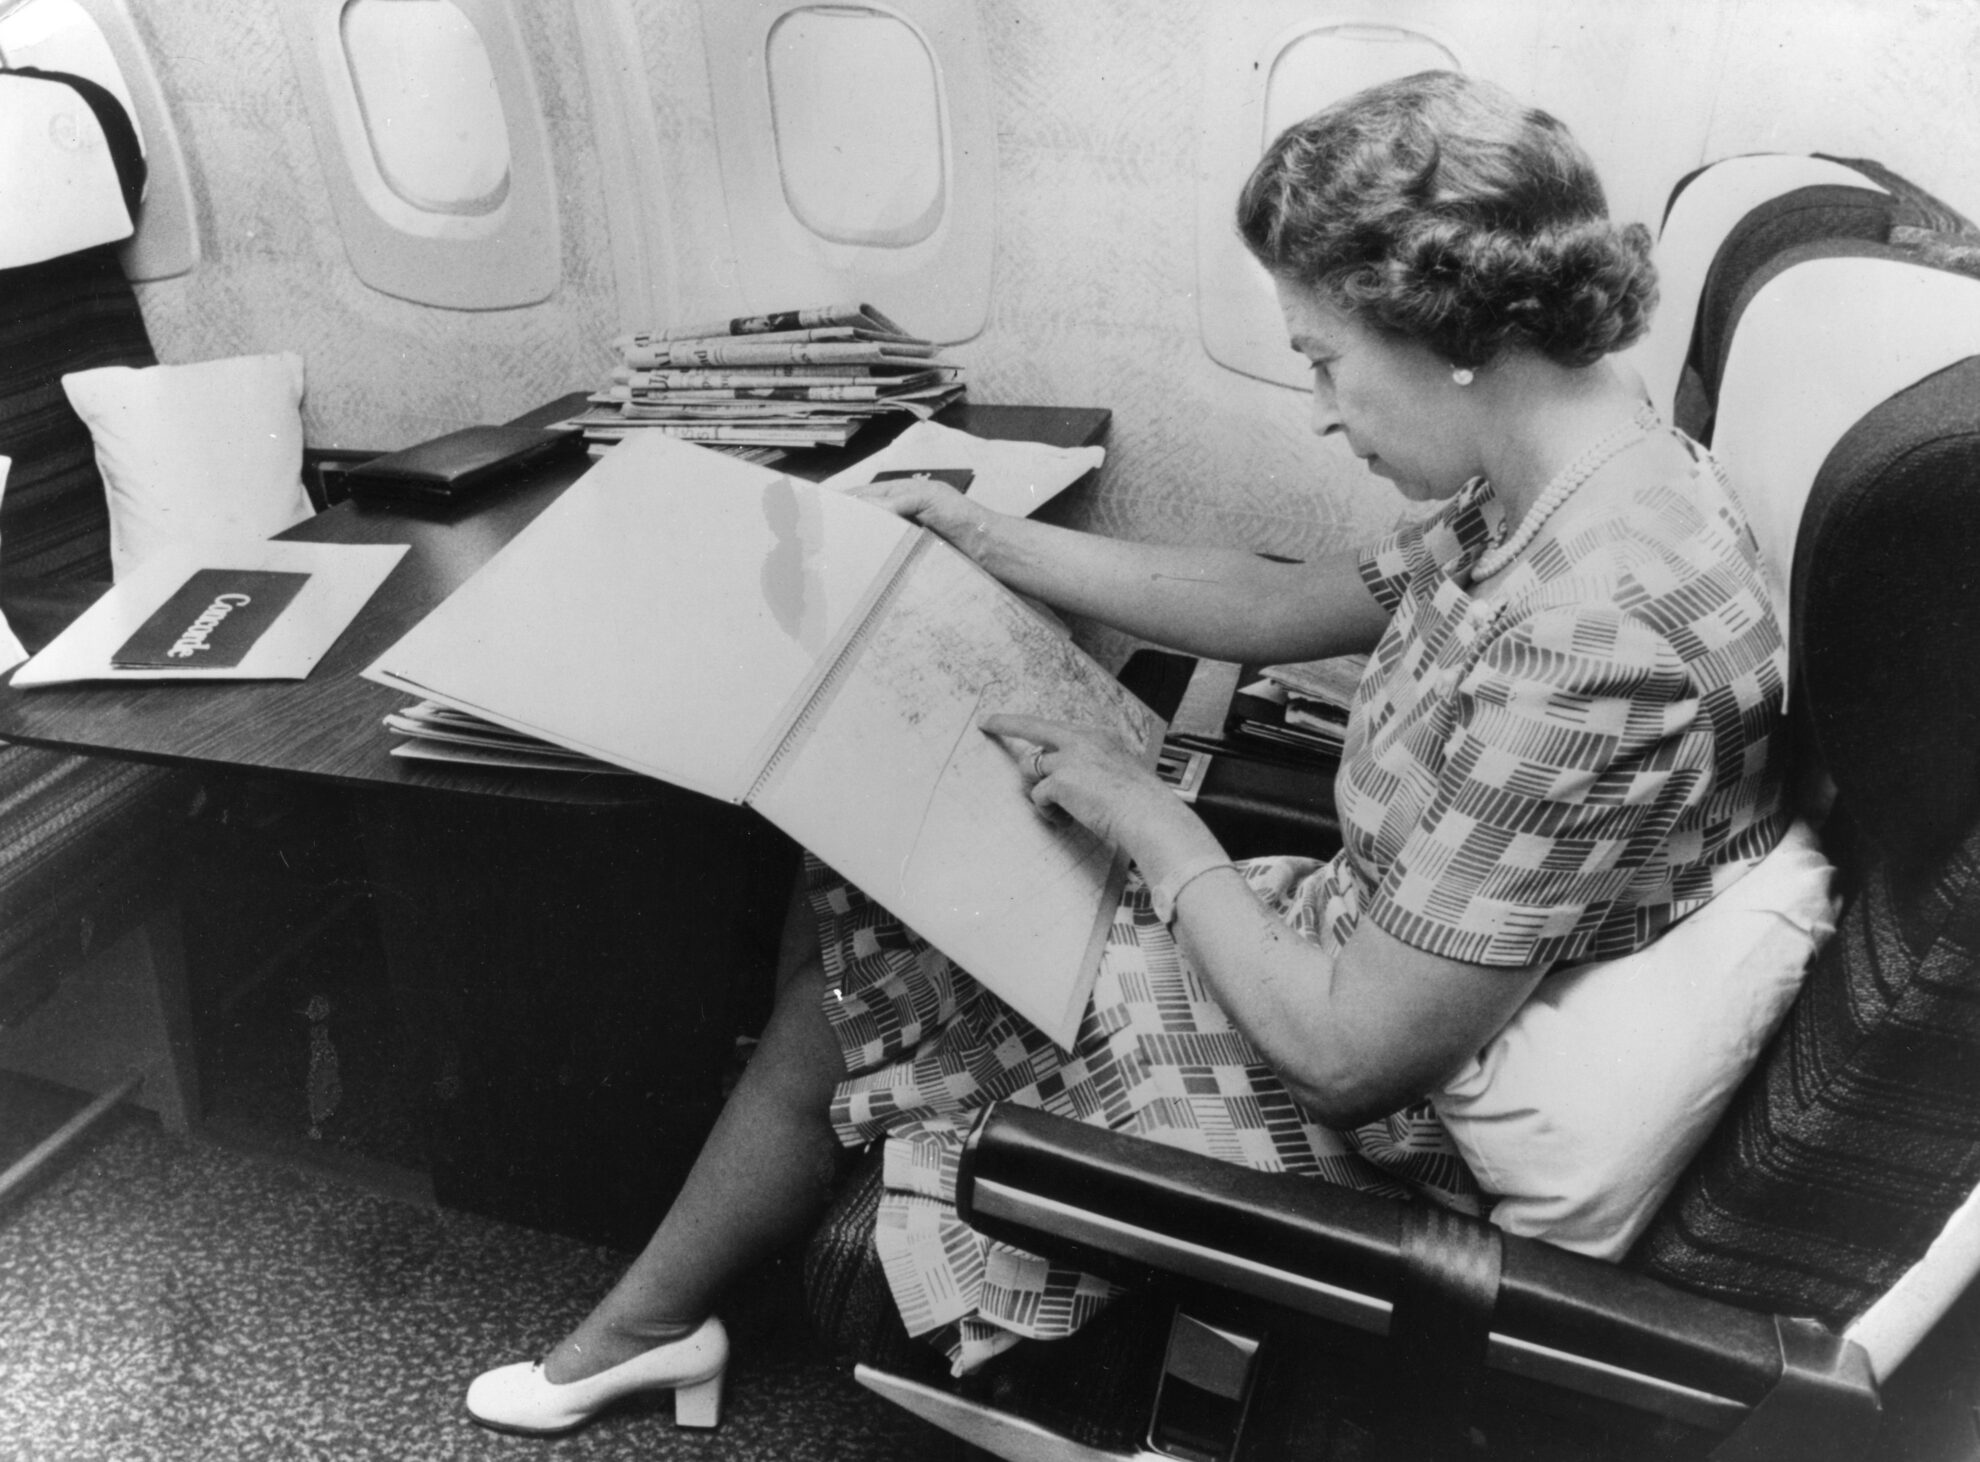 Queen Elizabeth II (b1926) flying back from Barbados on Concorde, 1977. Artist: Unknown. Image shot 1977. Exact date unknown.